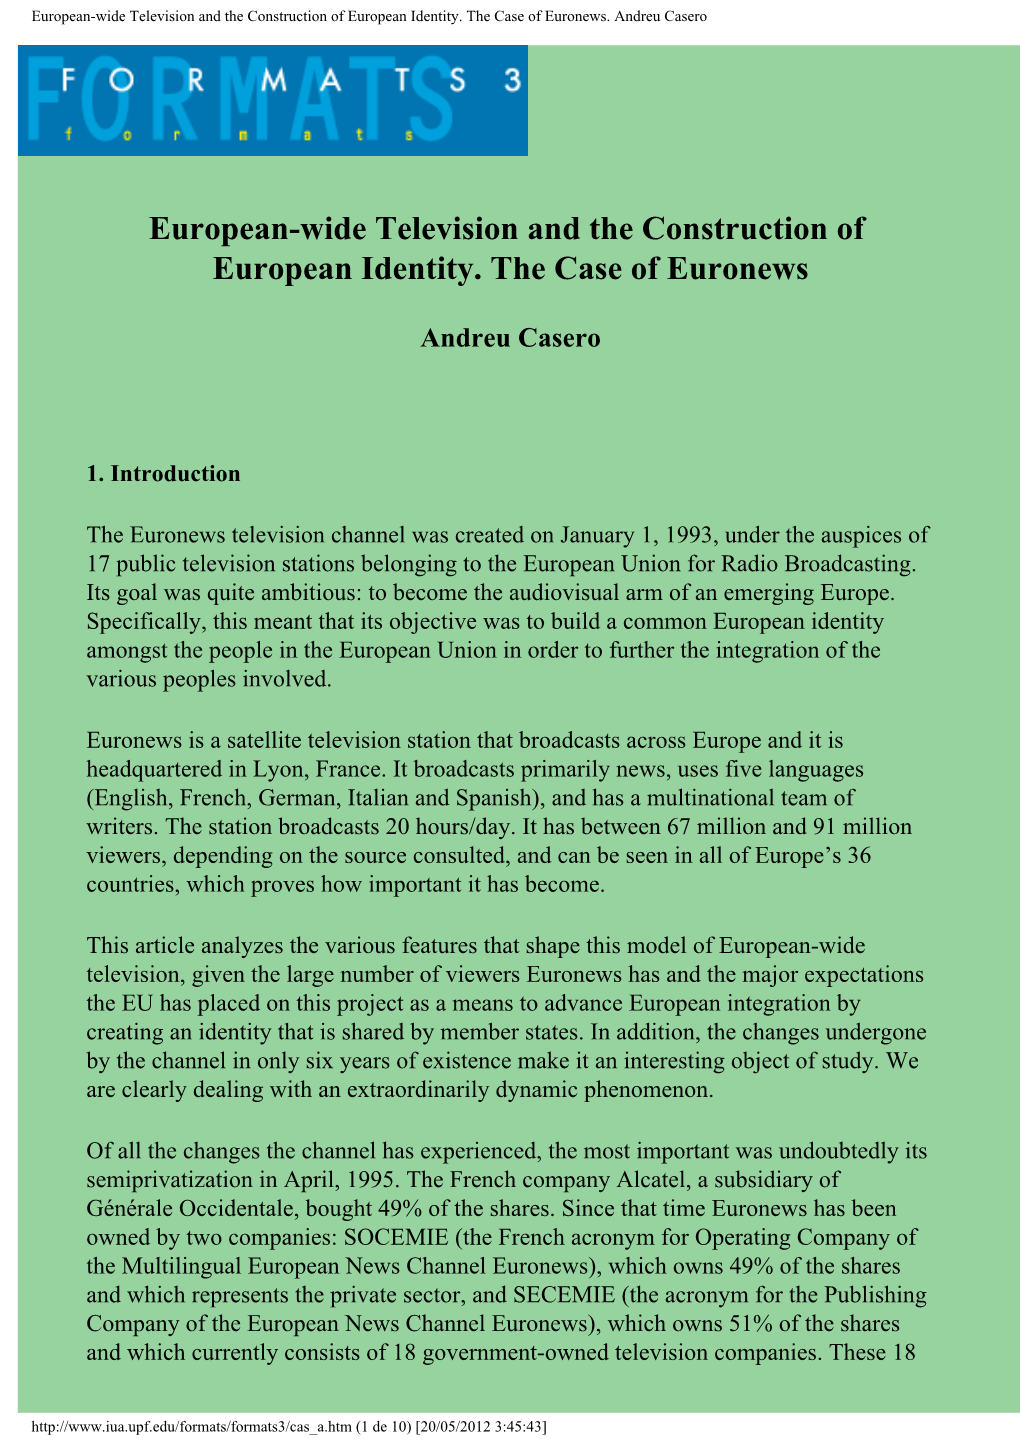 European-Wide Television and the Construction of European Identity. the Case of Euronews. Andreu Casero